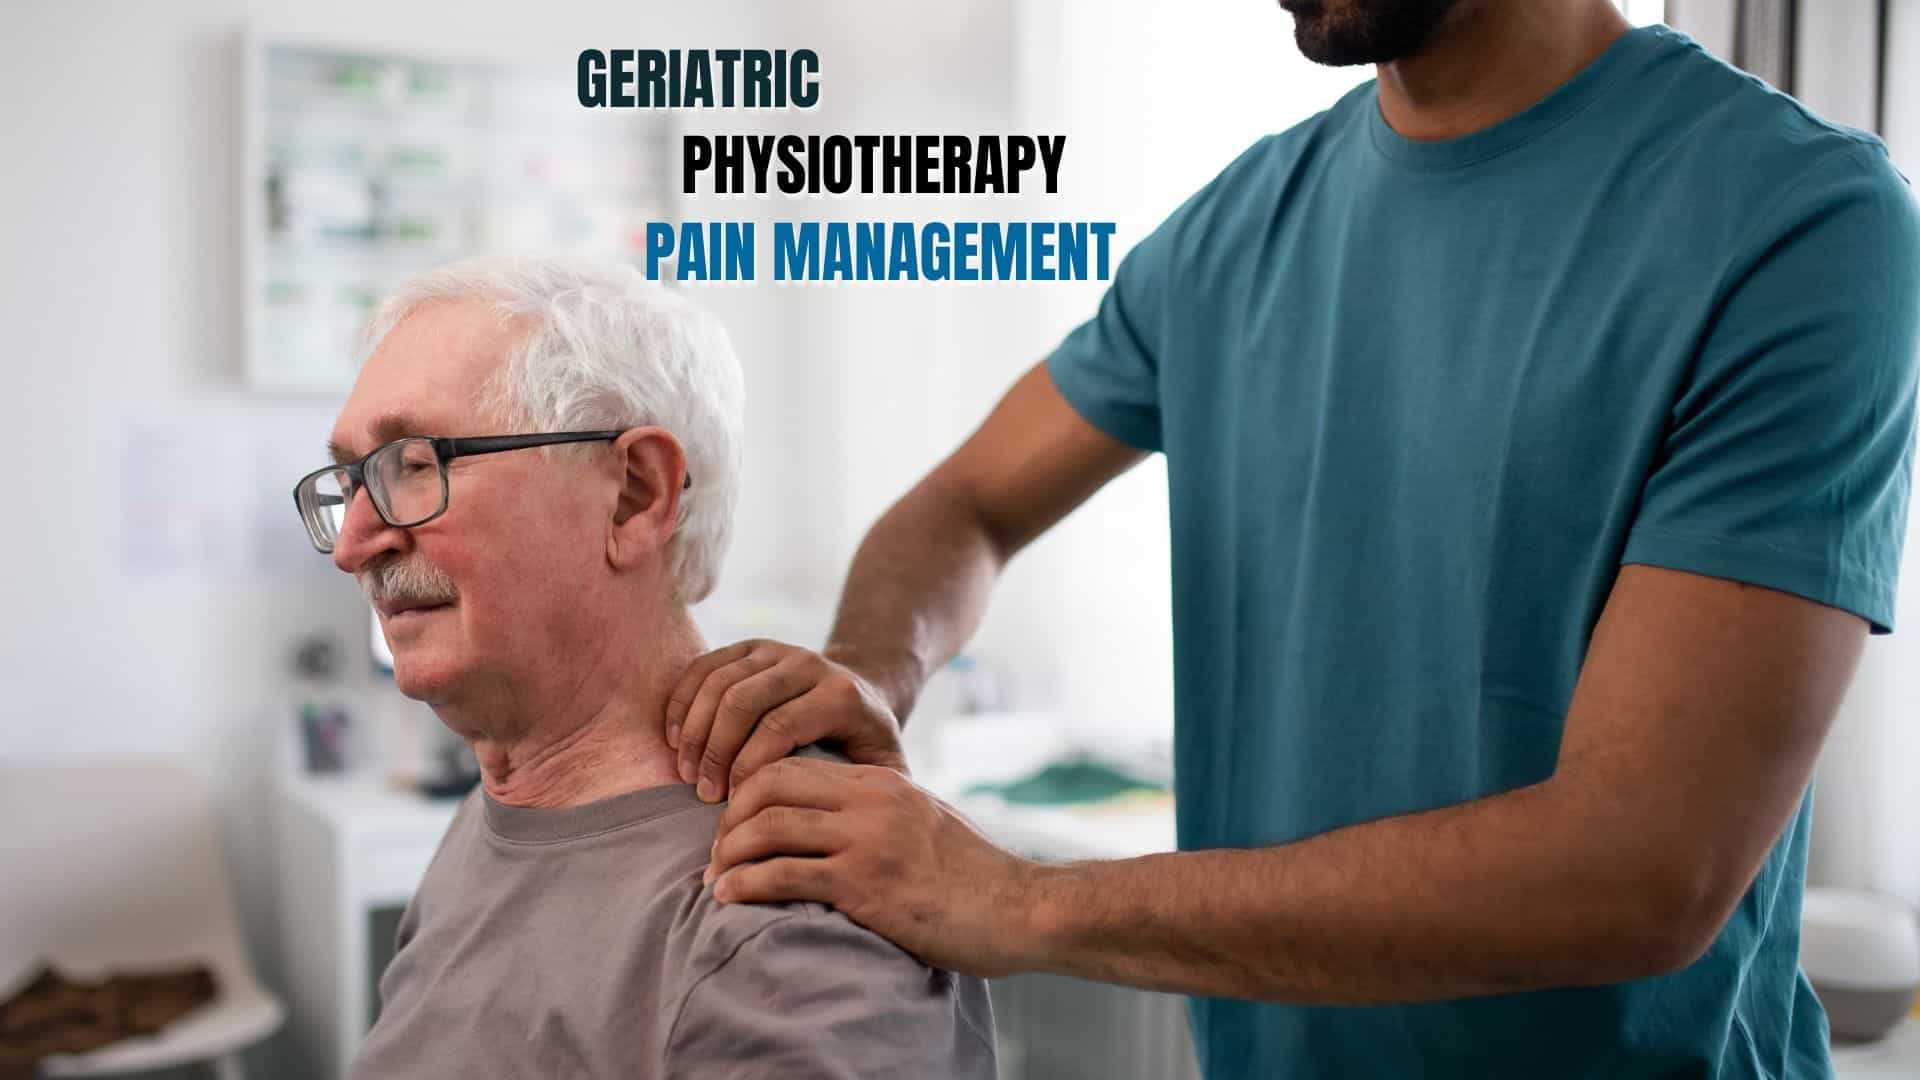 Geriatric Physiotherapy and Pain Management